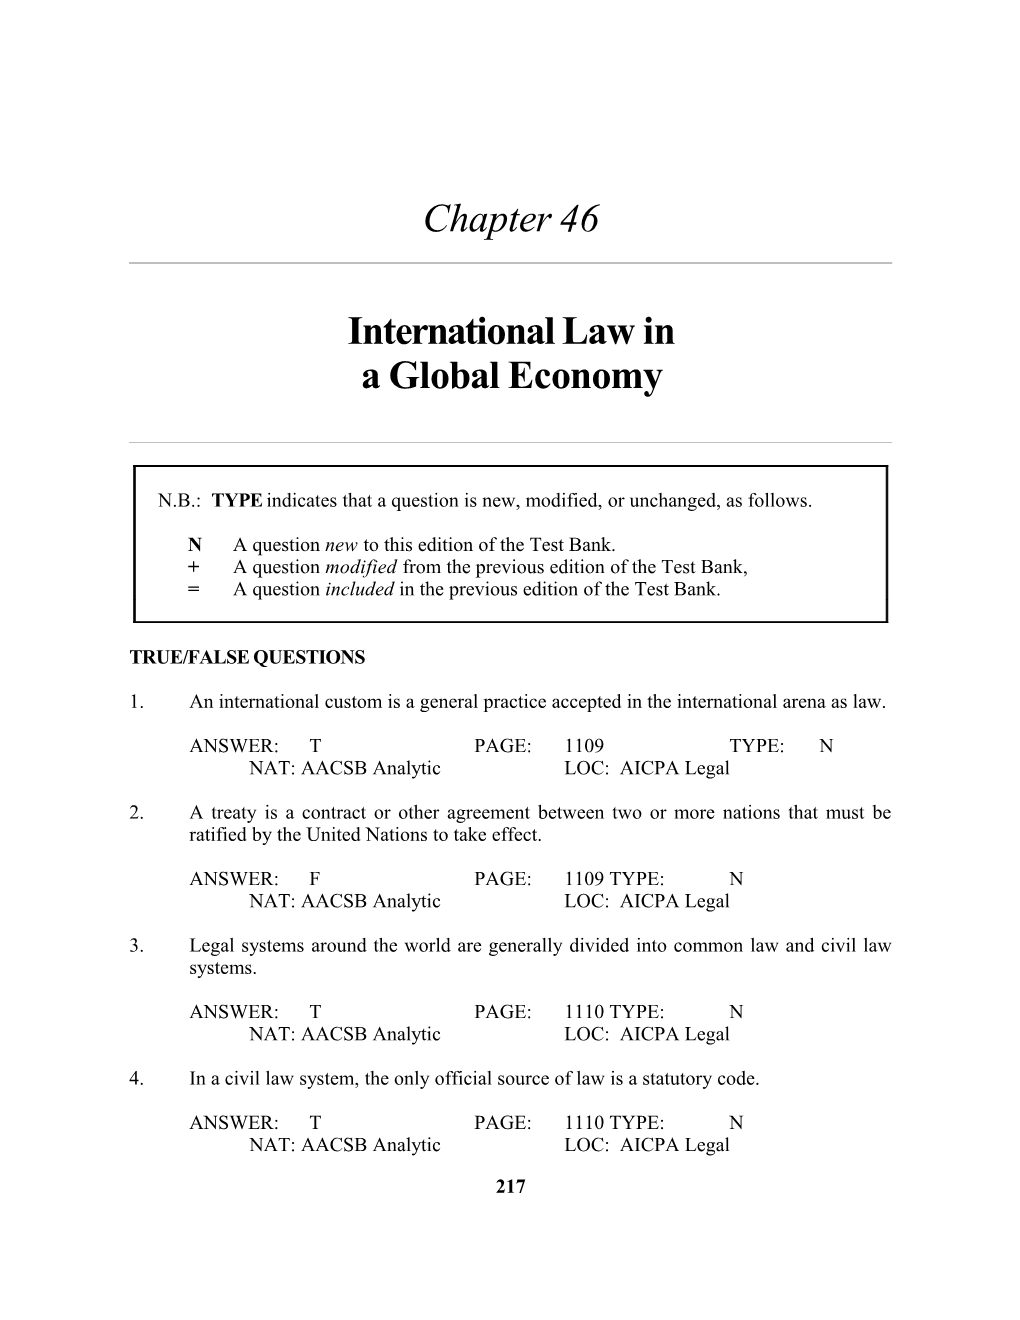 CHAPTER 46: International Law in a Global Economy 743